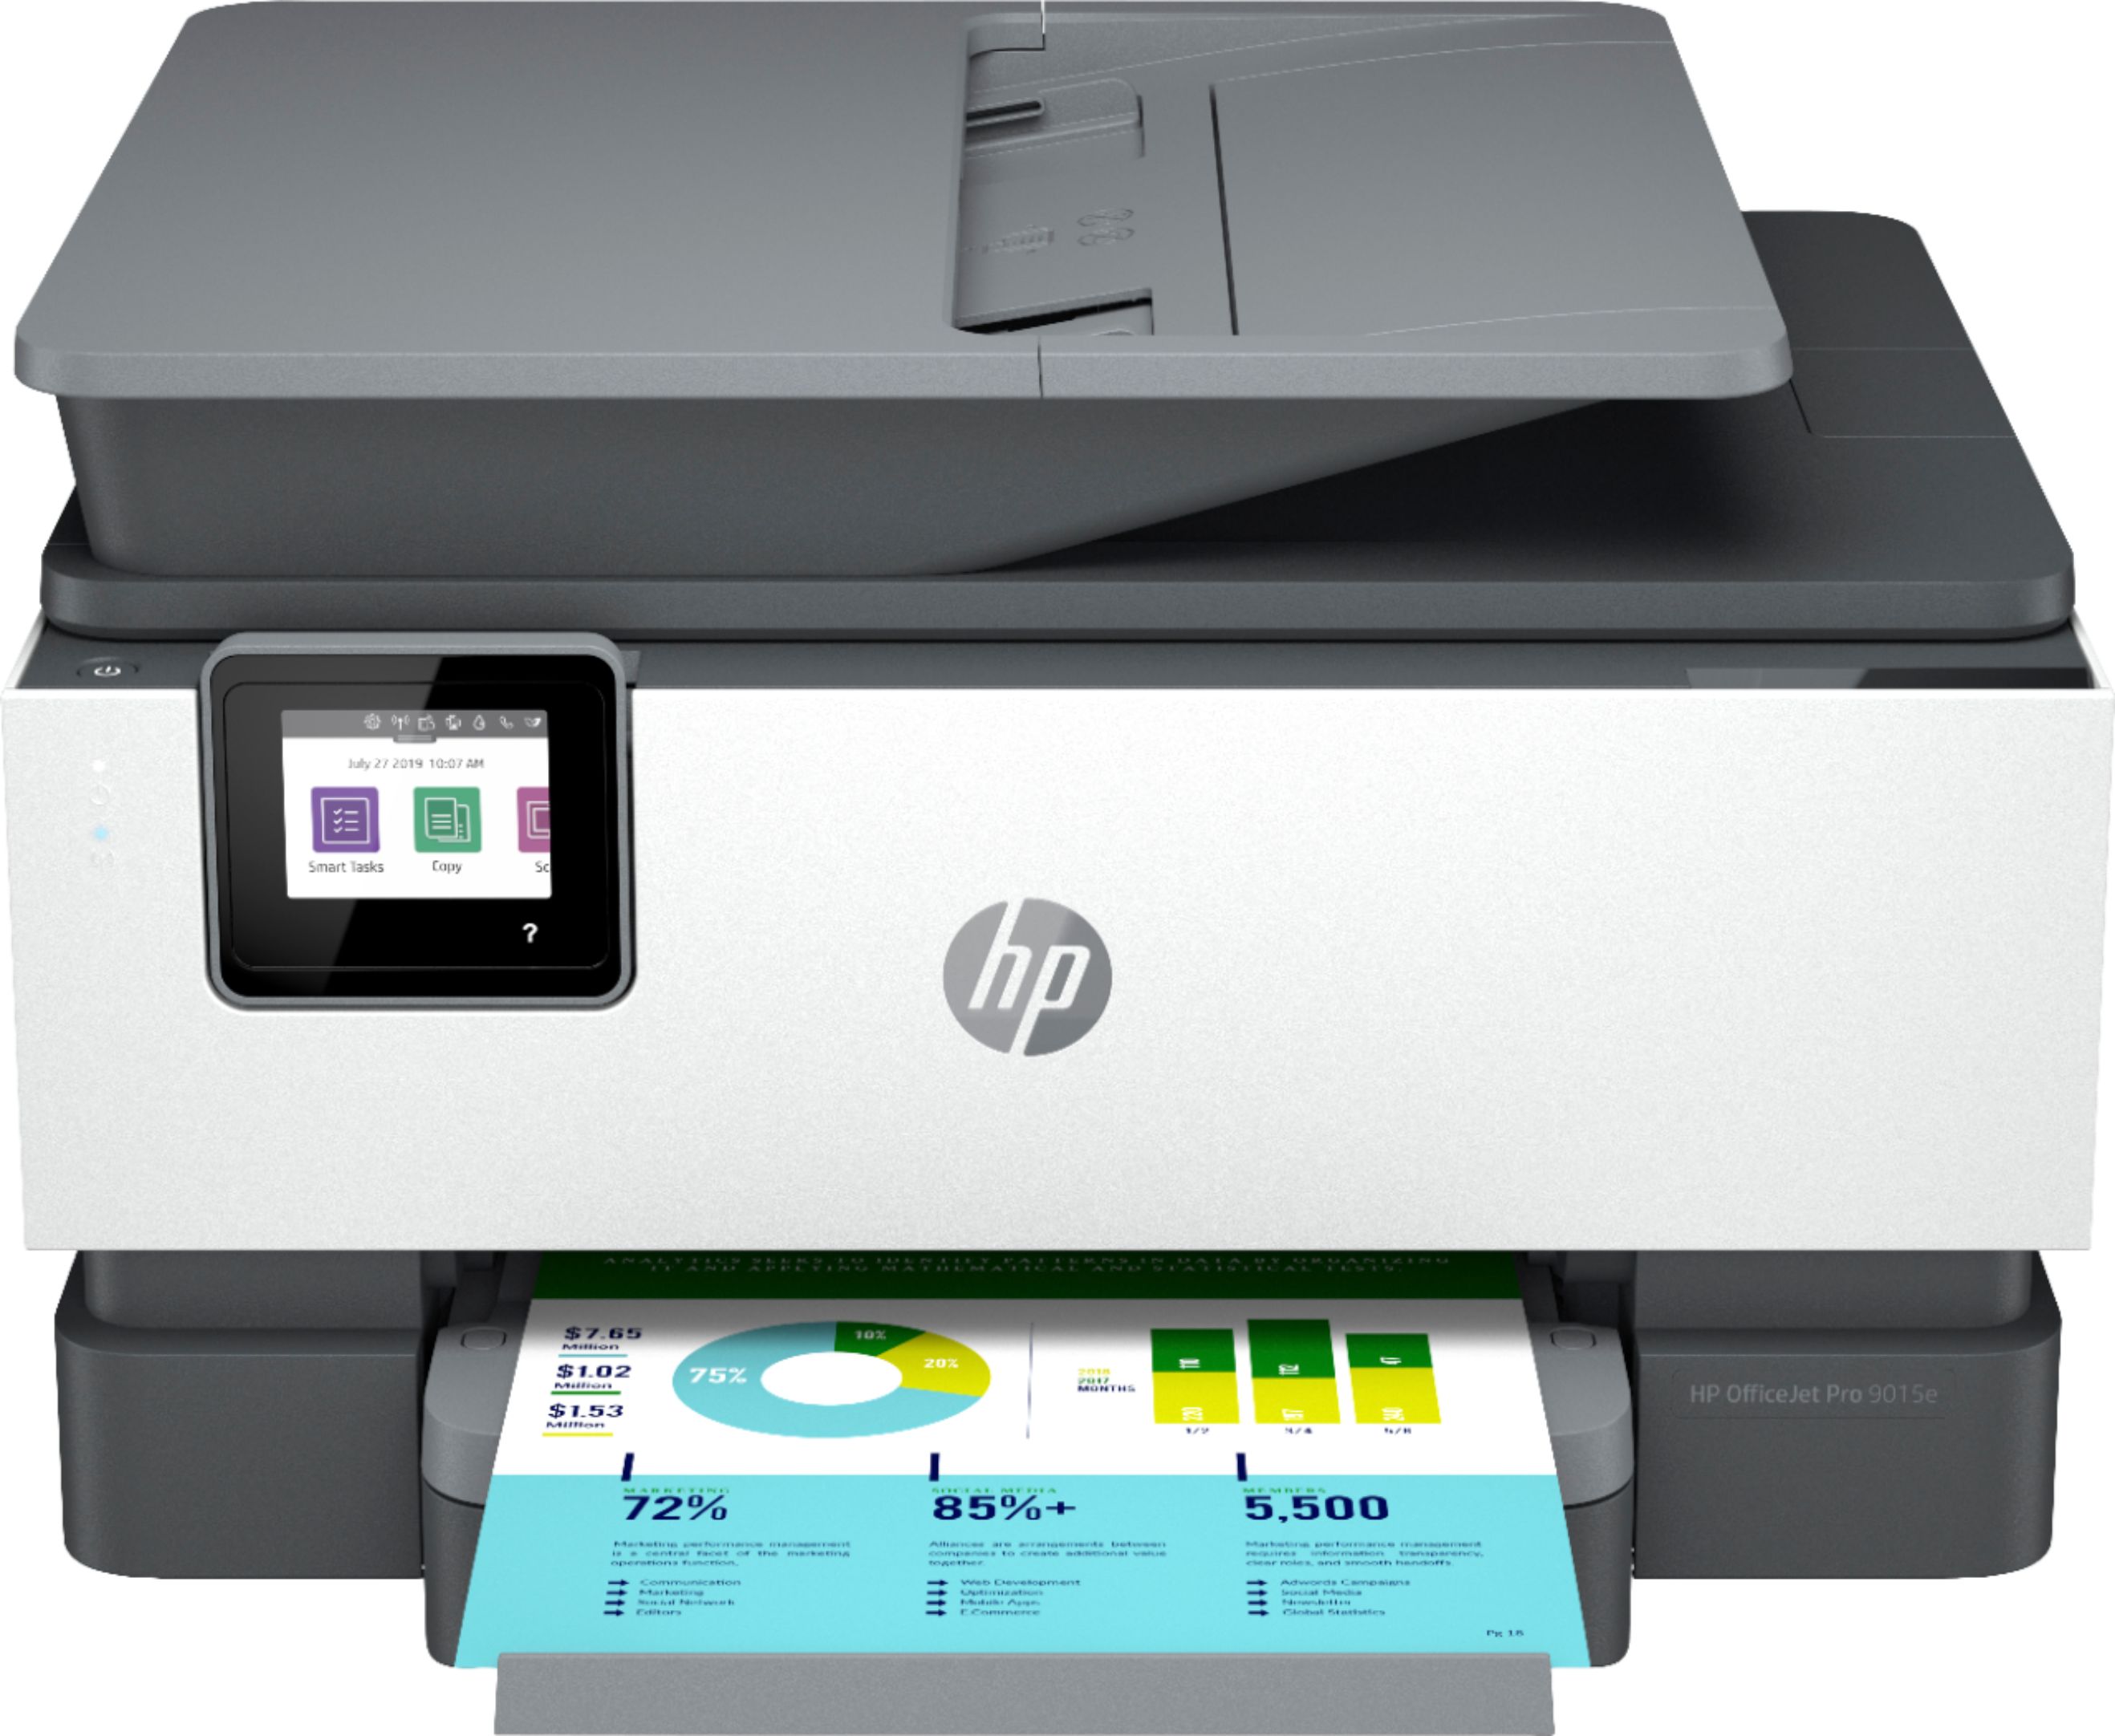 HP Pro 9015e Wireless Inkjet Printer with 6 months of Instant Ink Included with White OJP 9015e - Best Buy